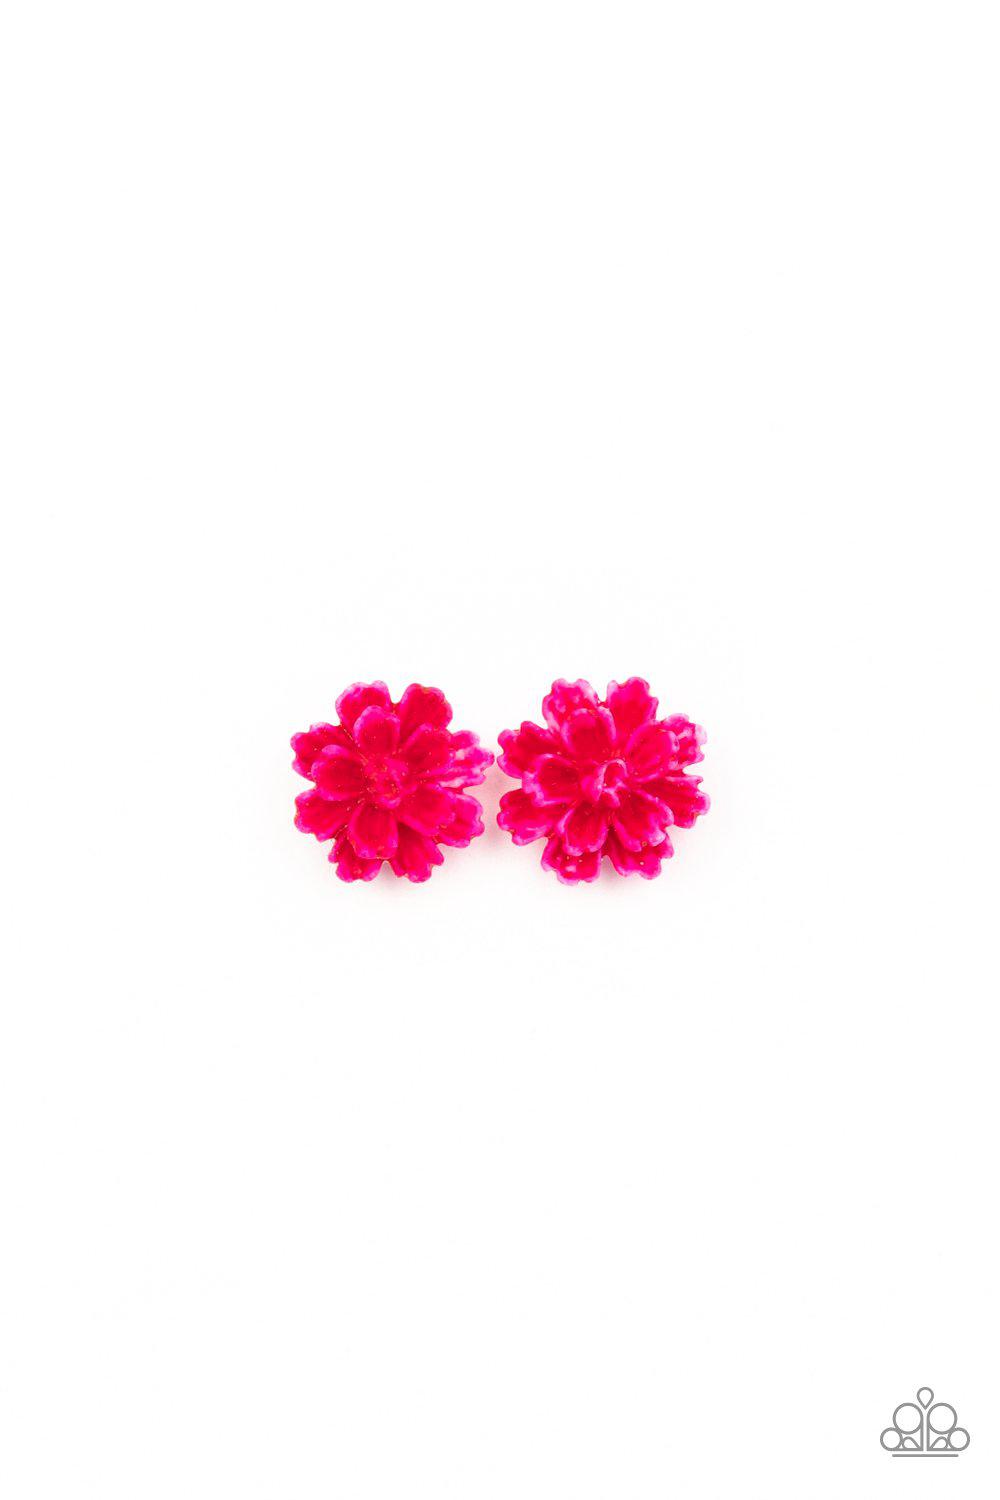 Starlet Shimmer Children&#39;s Pink and White Flower Post Earrings - Paparazzi Accessories (set of 5 pairs)- lightbox - CarasShop.com - $5 Jewelry by Cara Jewels